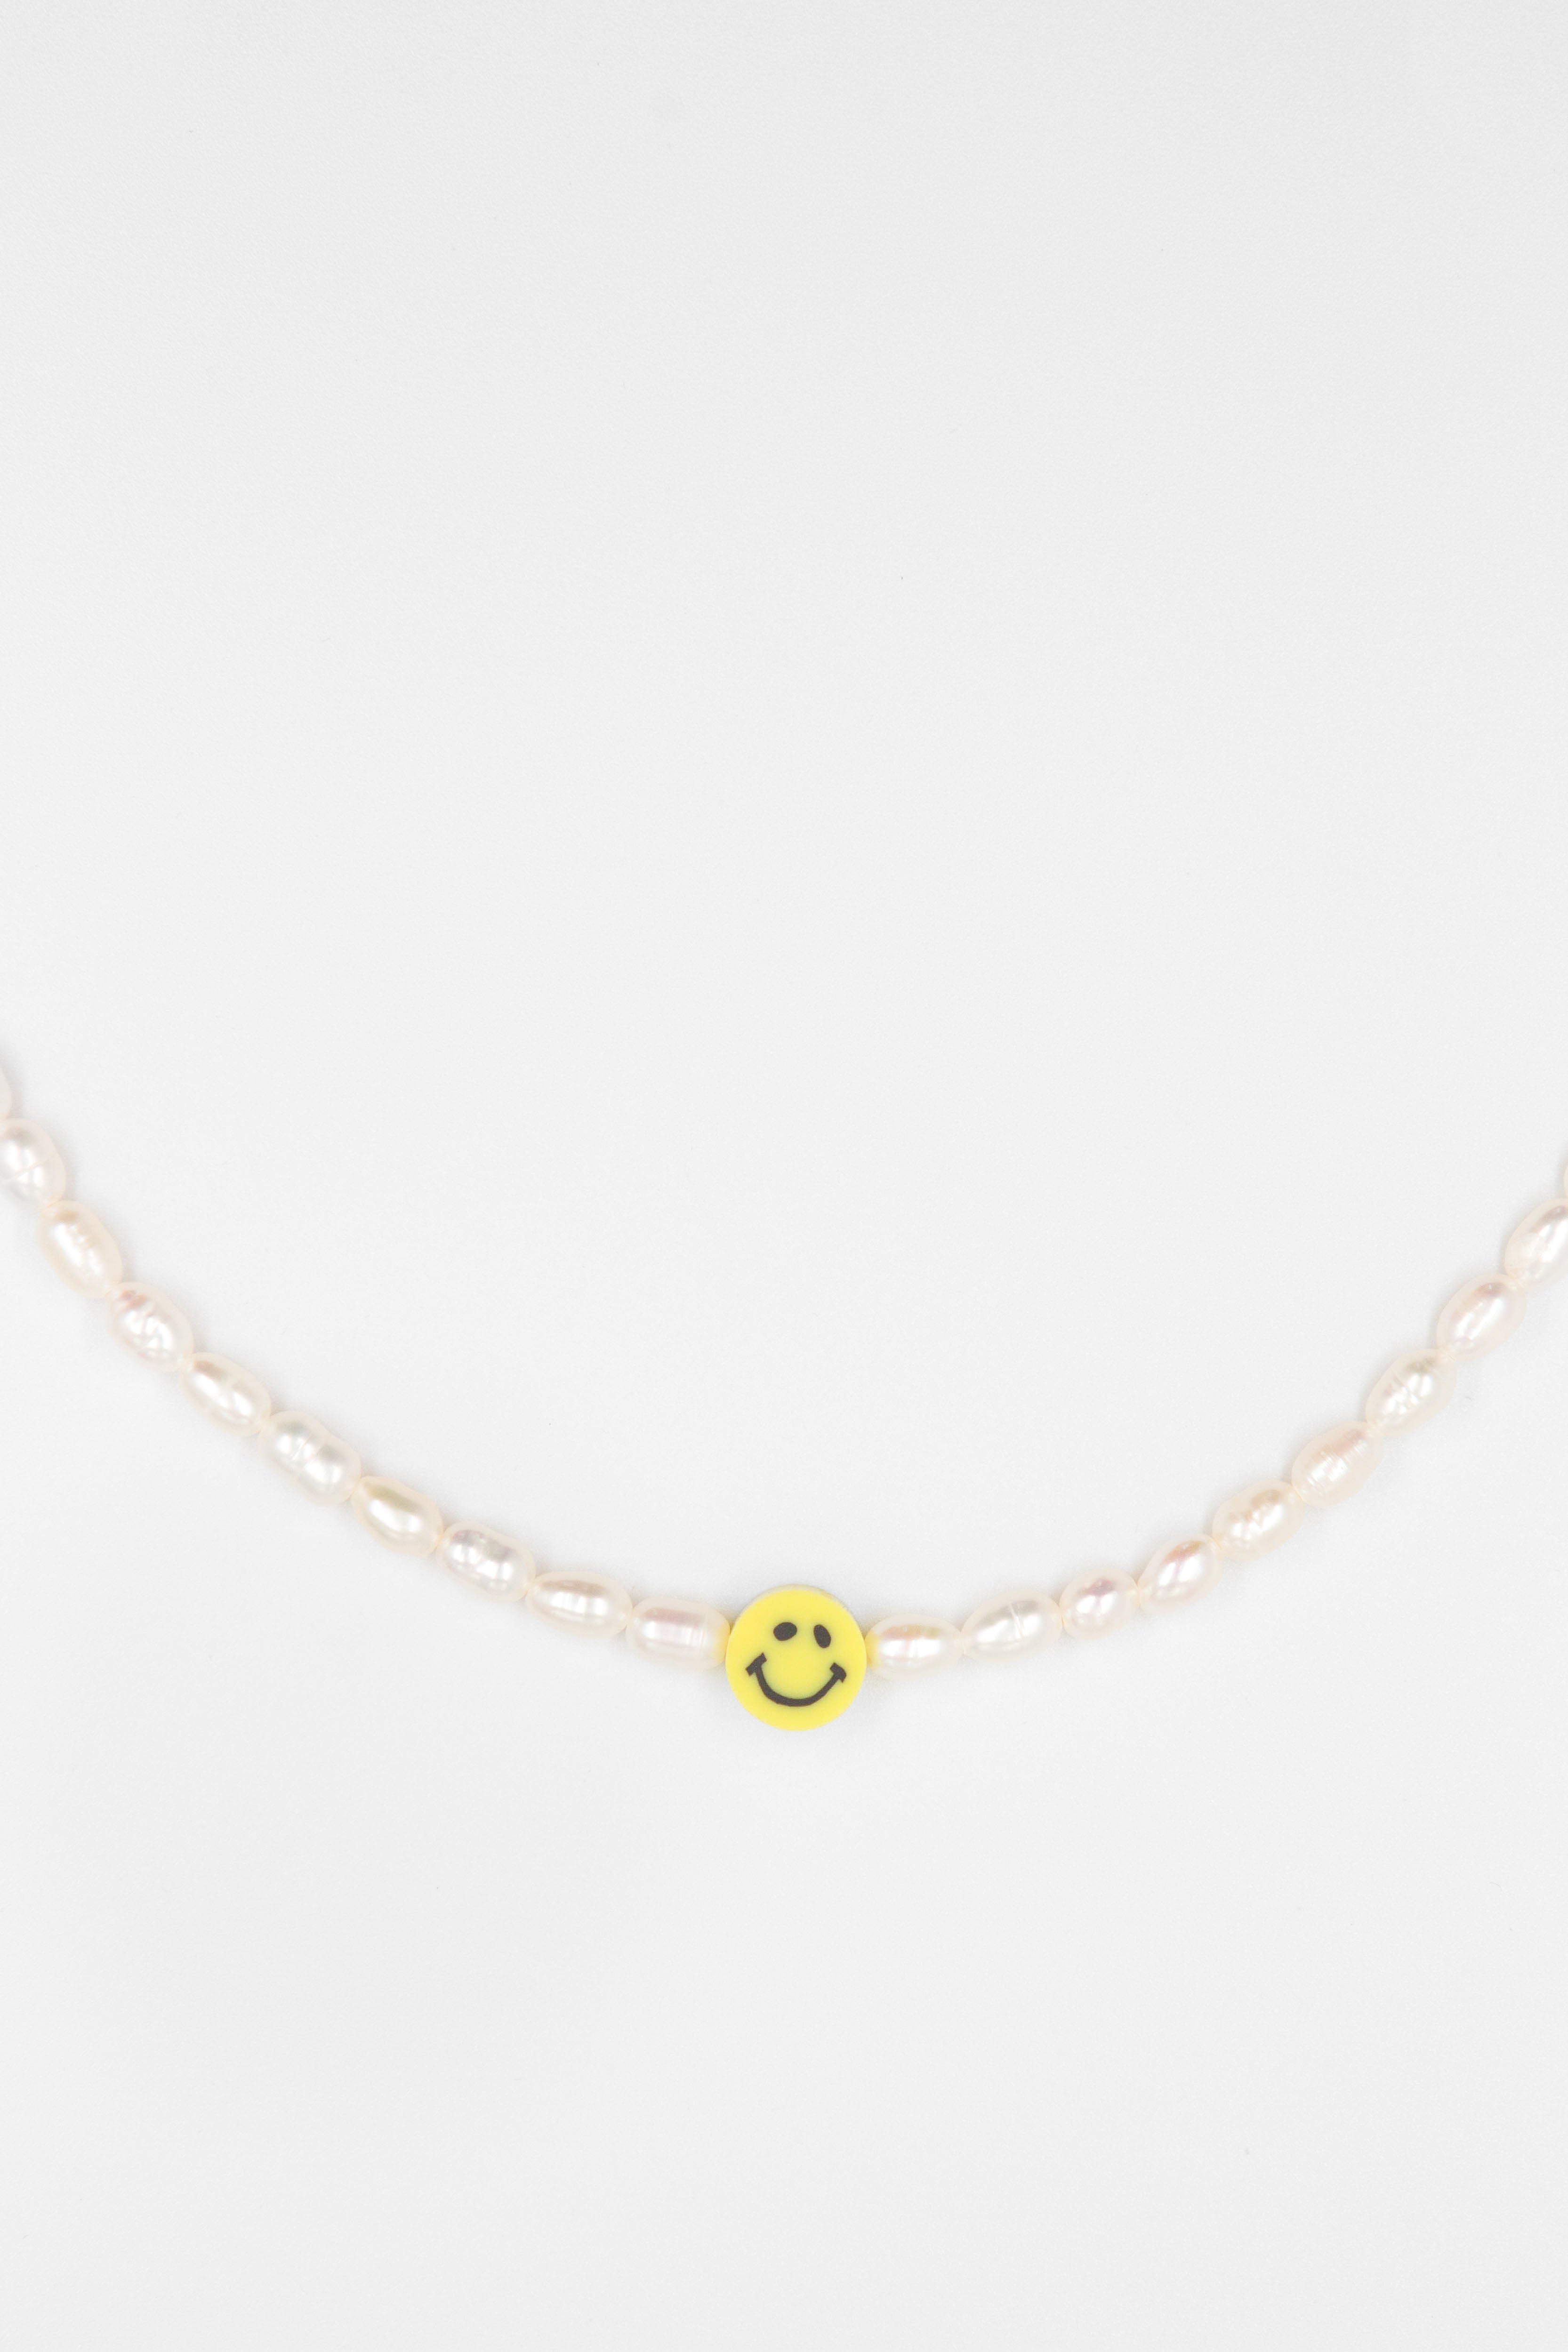 Be Happy Necklace - caliorjewelry